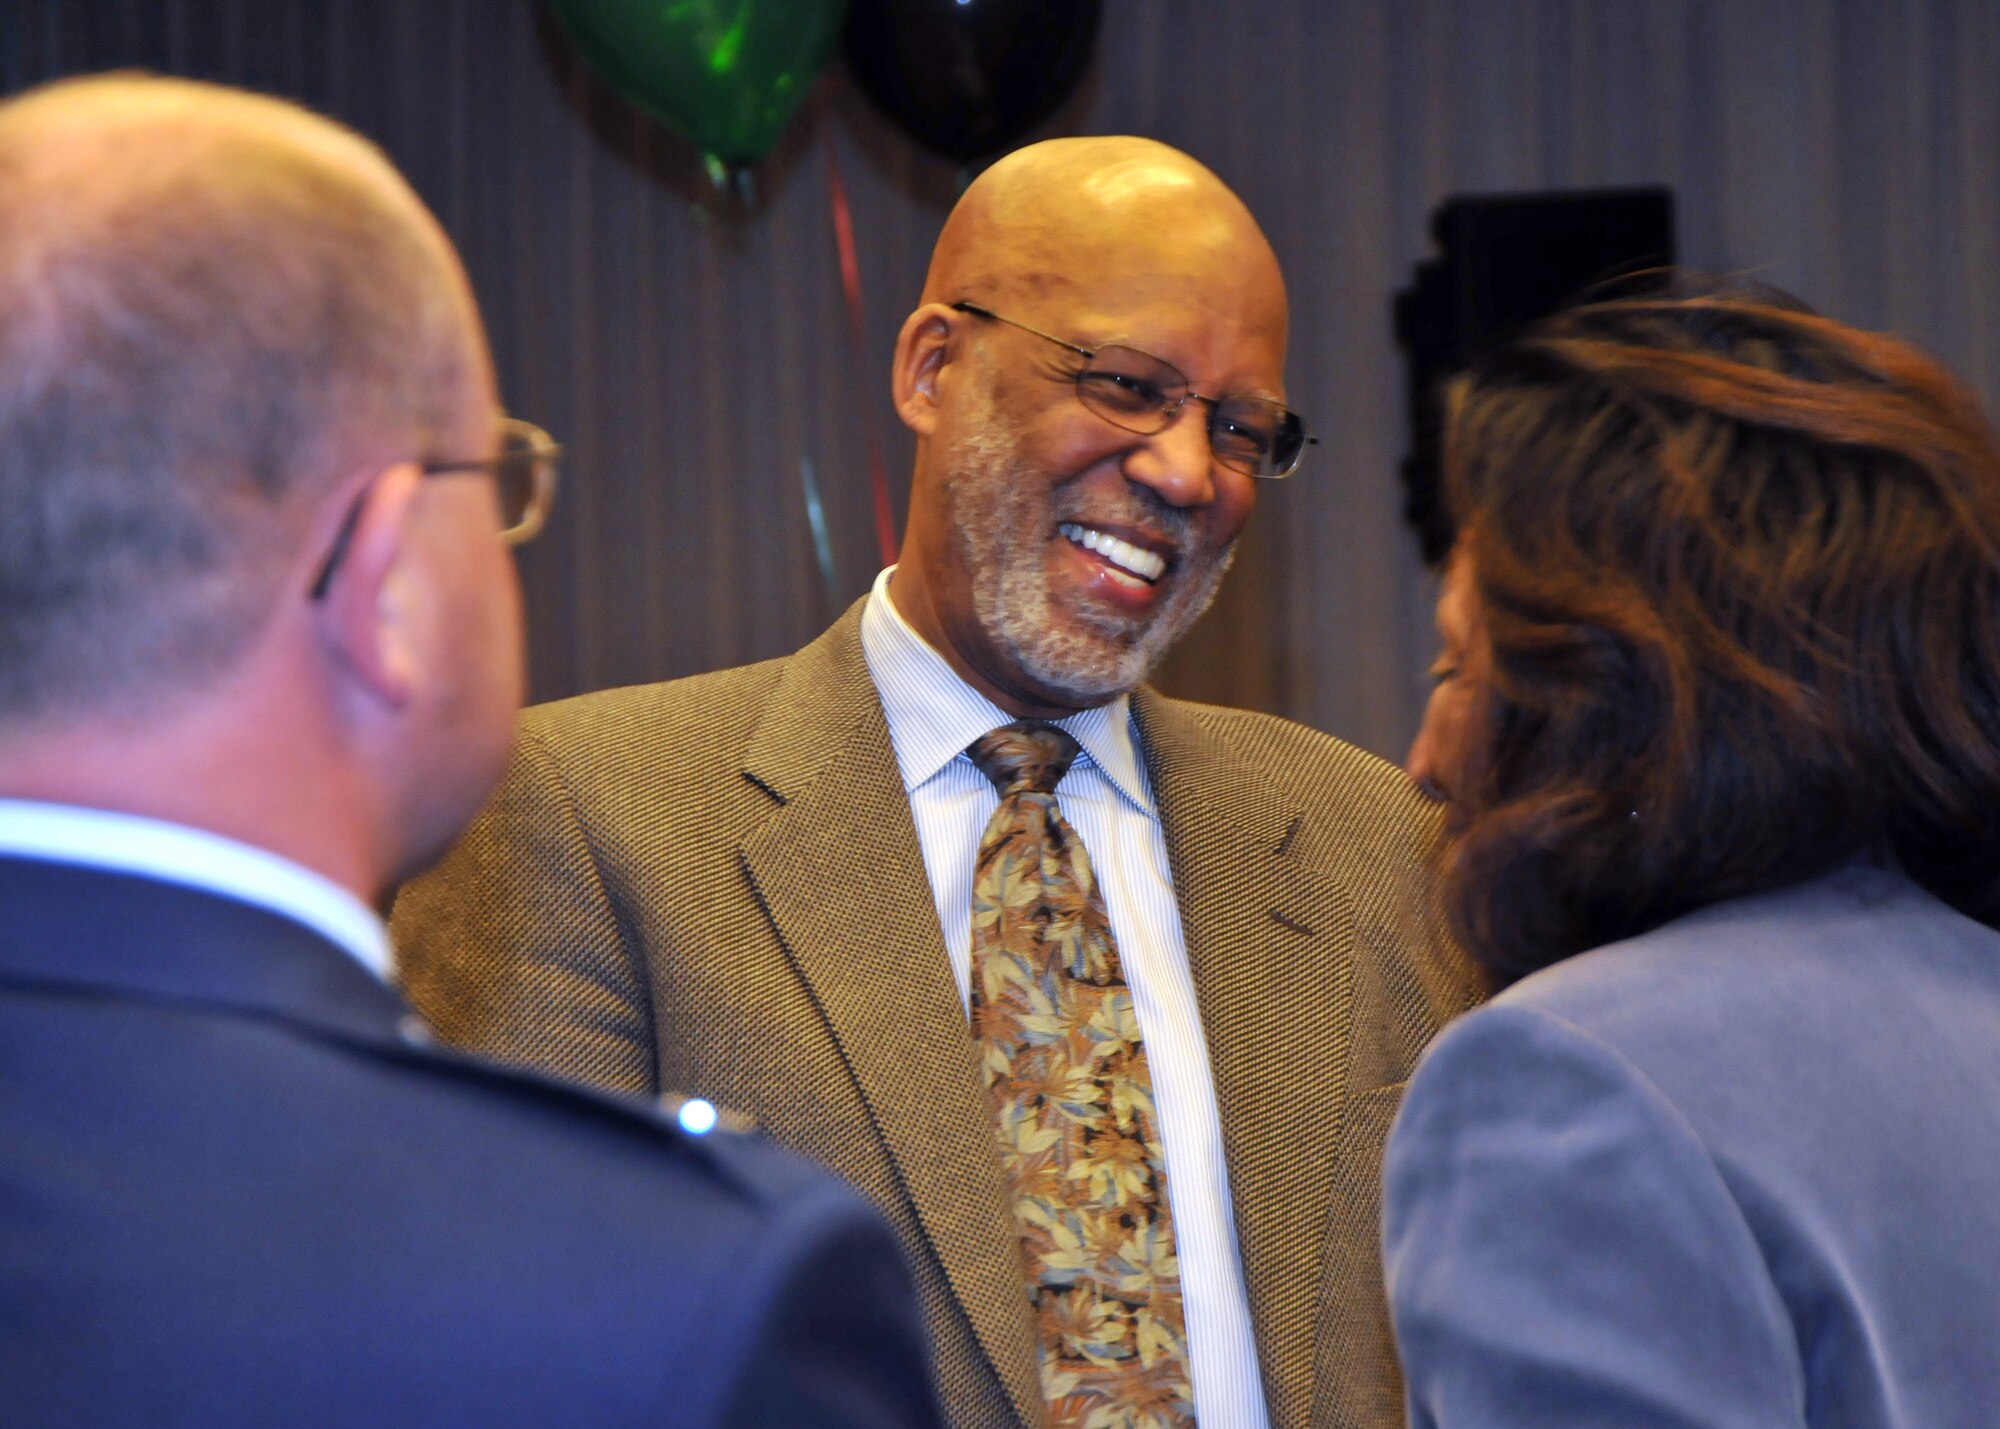 Dr. Terrence Roberts (center), a member of the Little Rock Nine, greets the audience members during the Black History month luncheon hosted jointly by SMC and The Aerospace Corporation, Feb. 19. Dr. Roberts spoke of his experiences as one of the nine students who attended Central High School in Little Rock, Ark. and of his perspectives on integration in the United States. (Photo by Atiba S. Copeland)